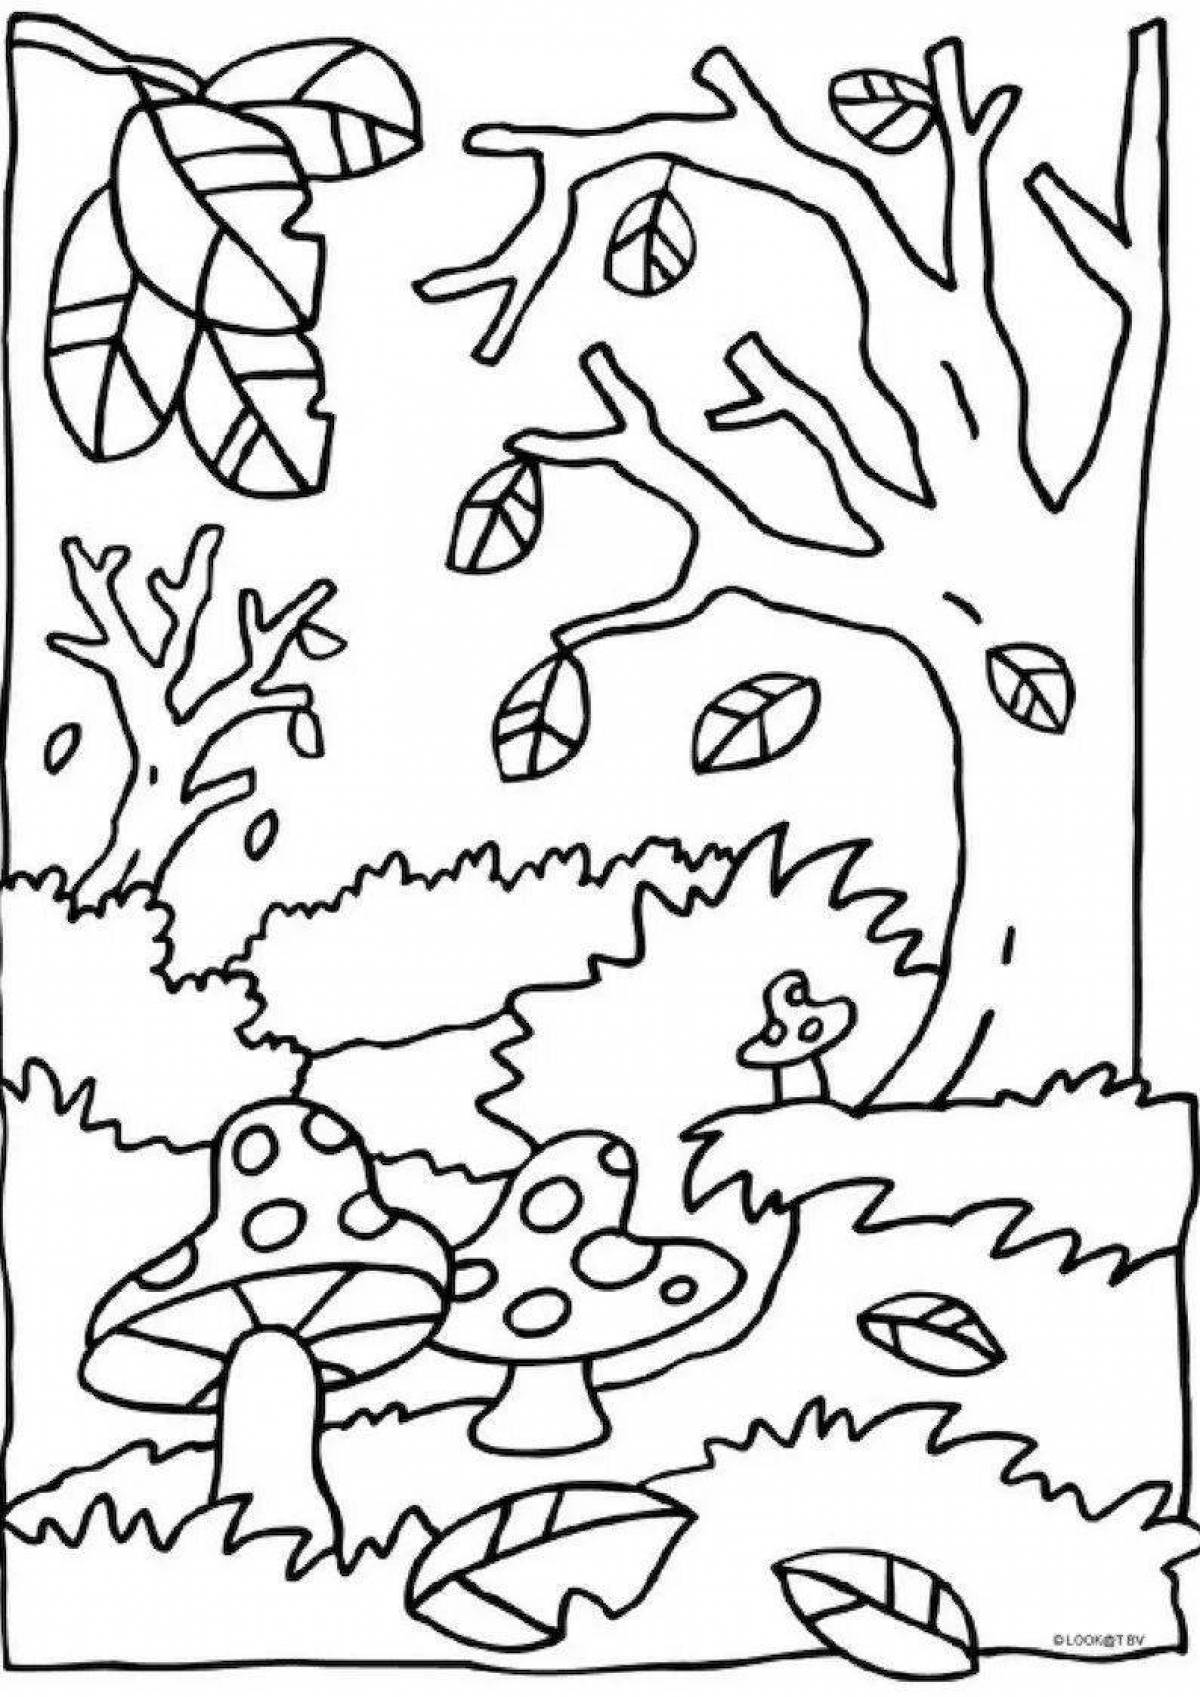 Harmonious autumn forest coloring page